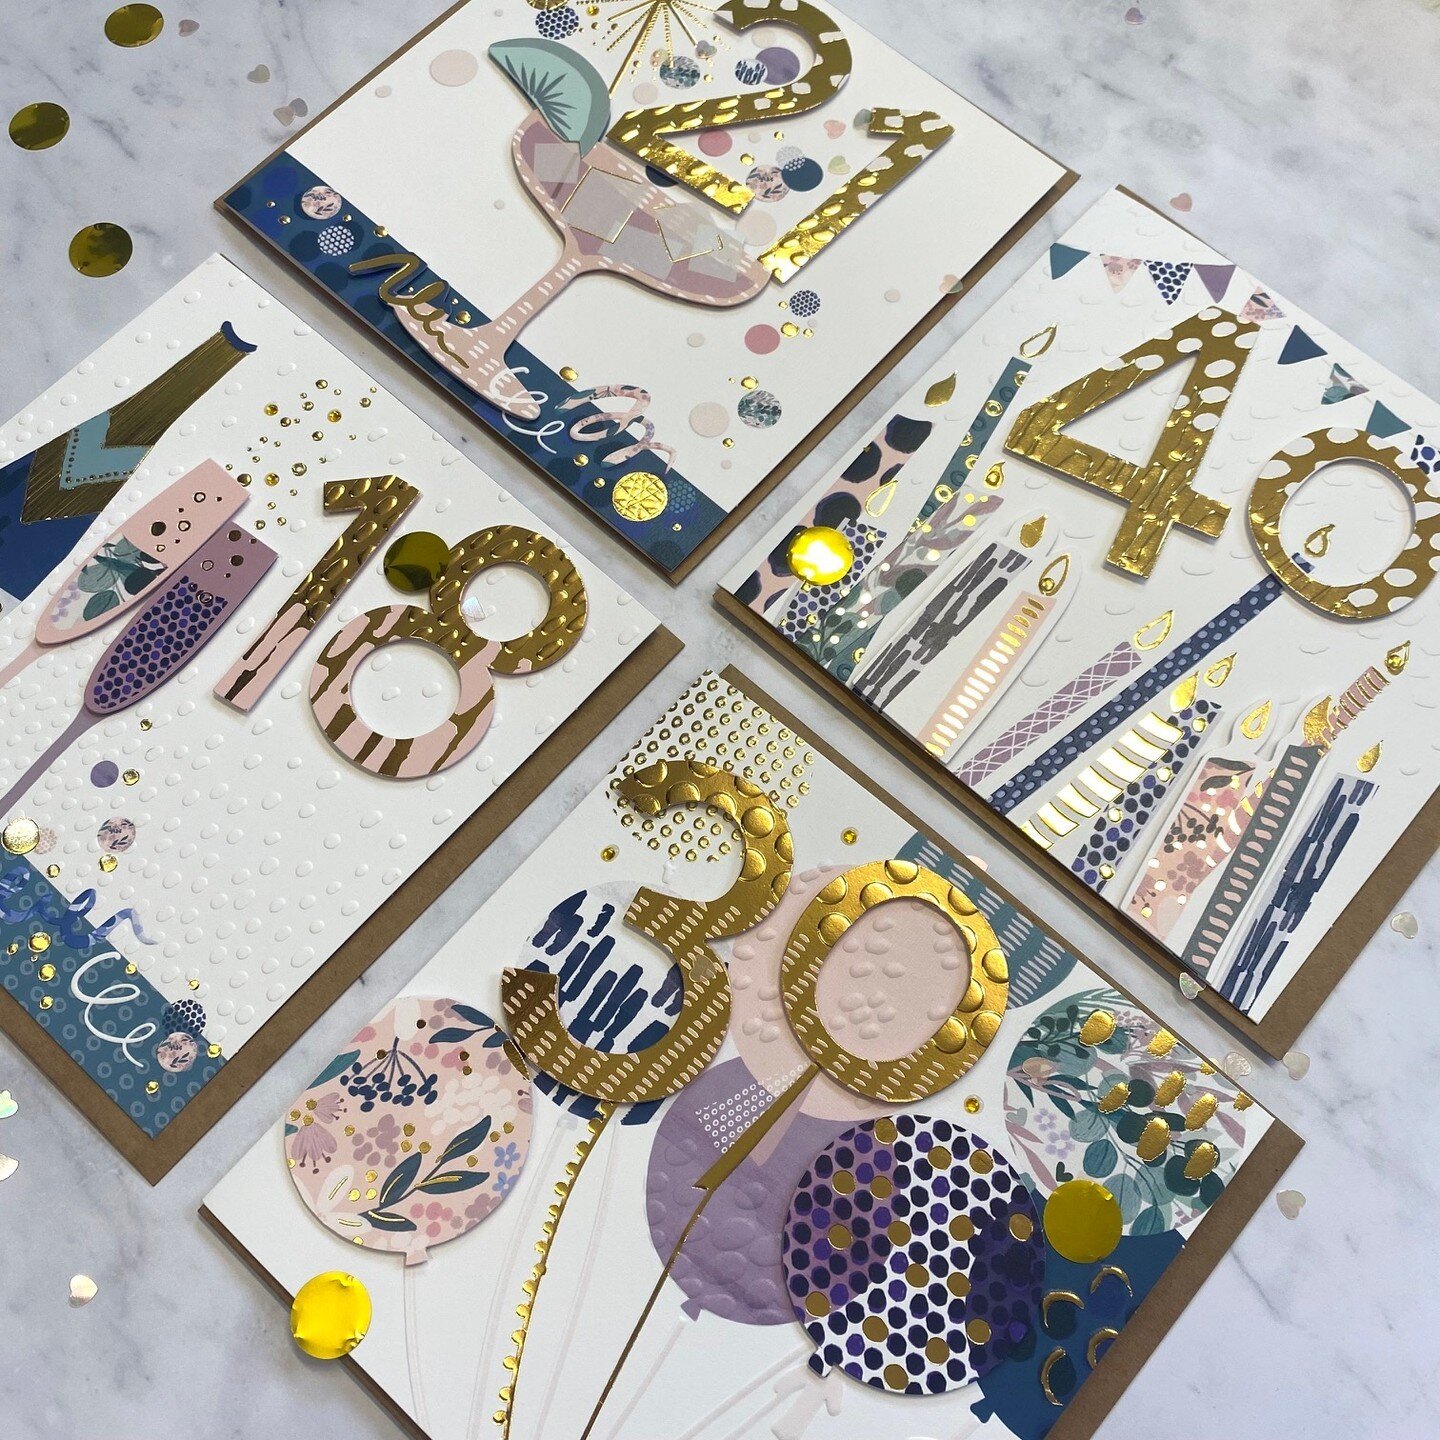 Introducing Violet Ink by Talking Pictures. From candles to cocktails, Violet Ink features stand out tip on's and beautifully gold foiled numbers to celebrate any big birthday in style
.
.
.
.
.
#talkingpictures #agemilestones #goldfoiling #happybirt